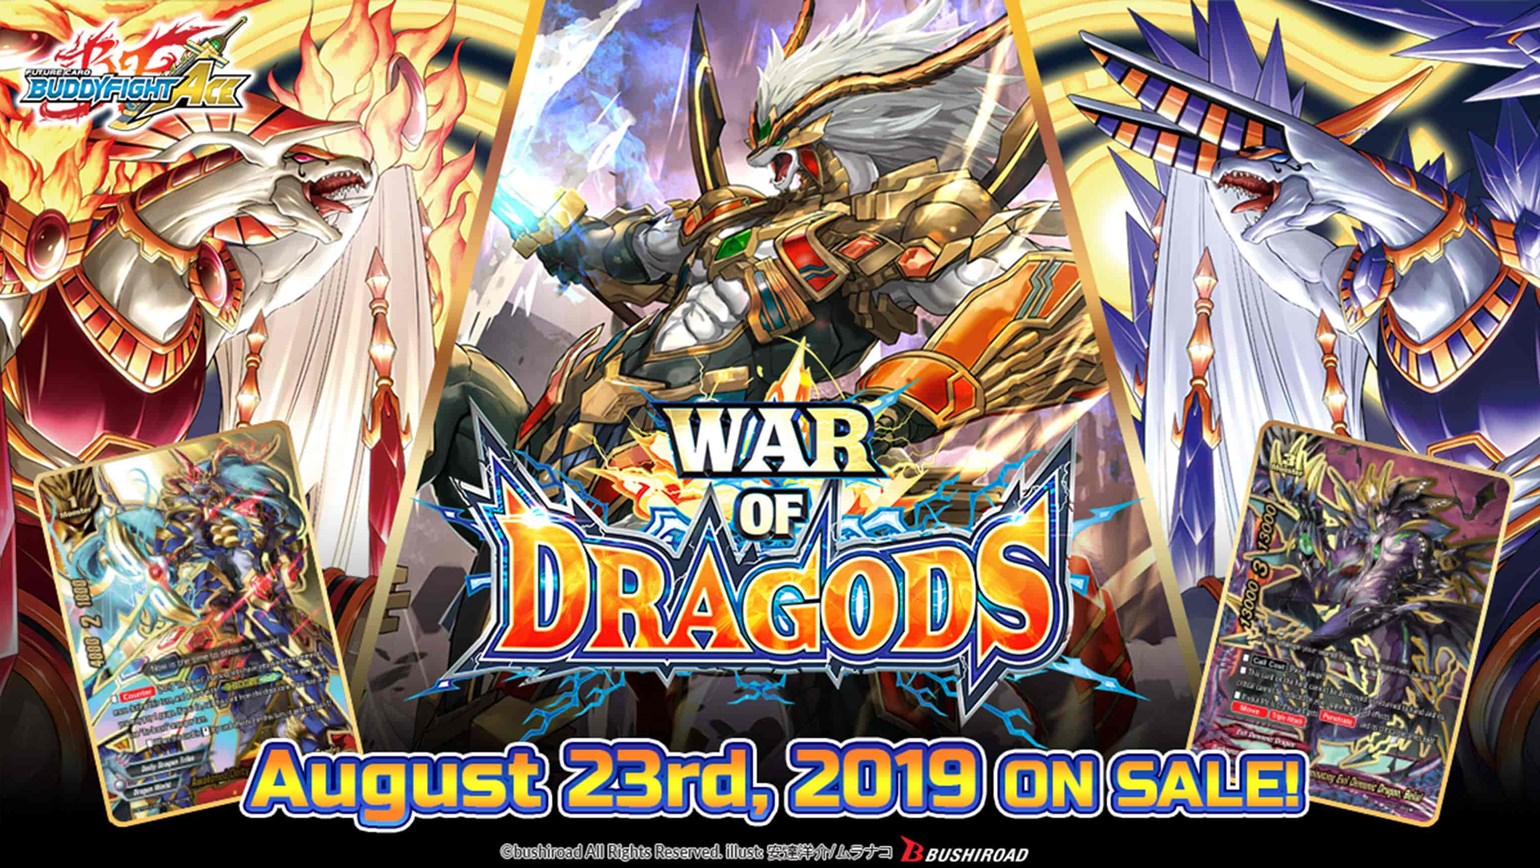 Future Card Buddyfight: Legend of Double Horus and War of Dragods Coming August 23rd